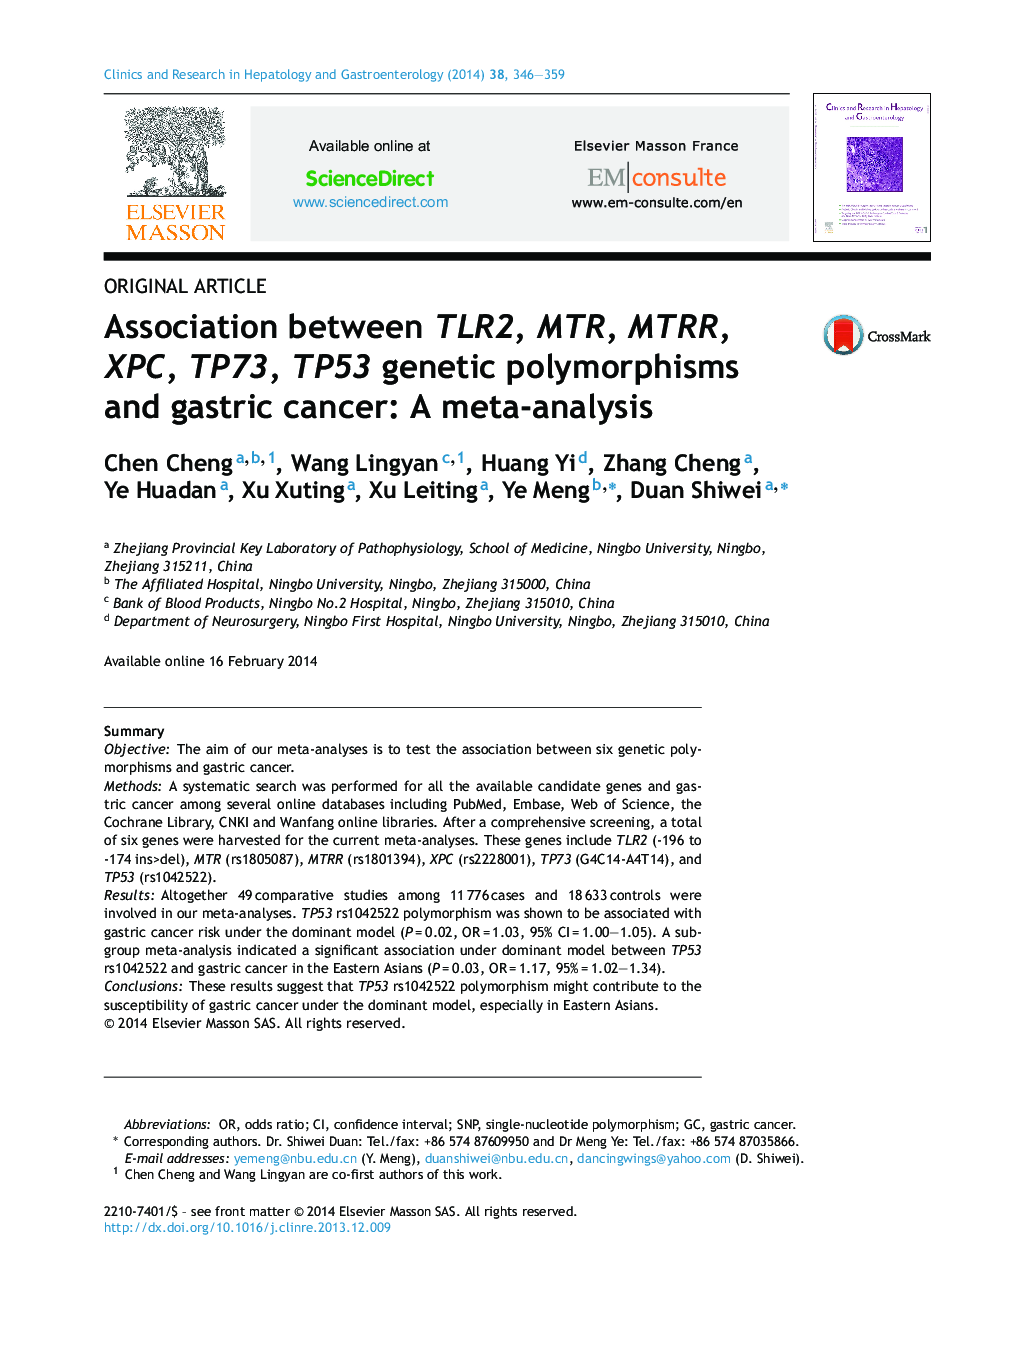 Association between TLR2, MTR, MTRR, XPC, TP73, TP53 genetic polymorphisms and gastric cancer: A meta-analysis